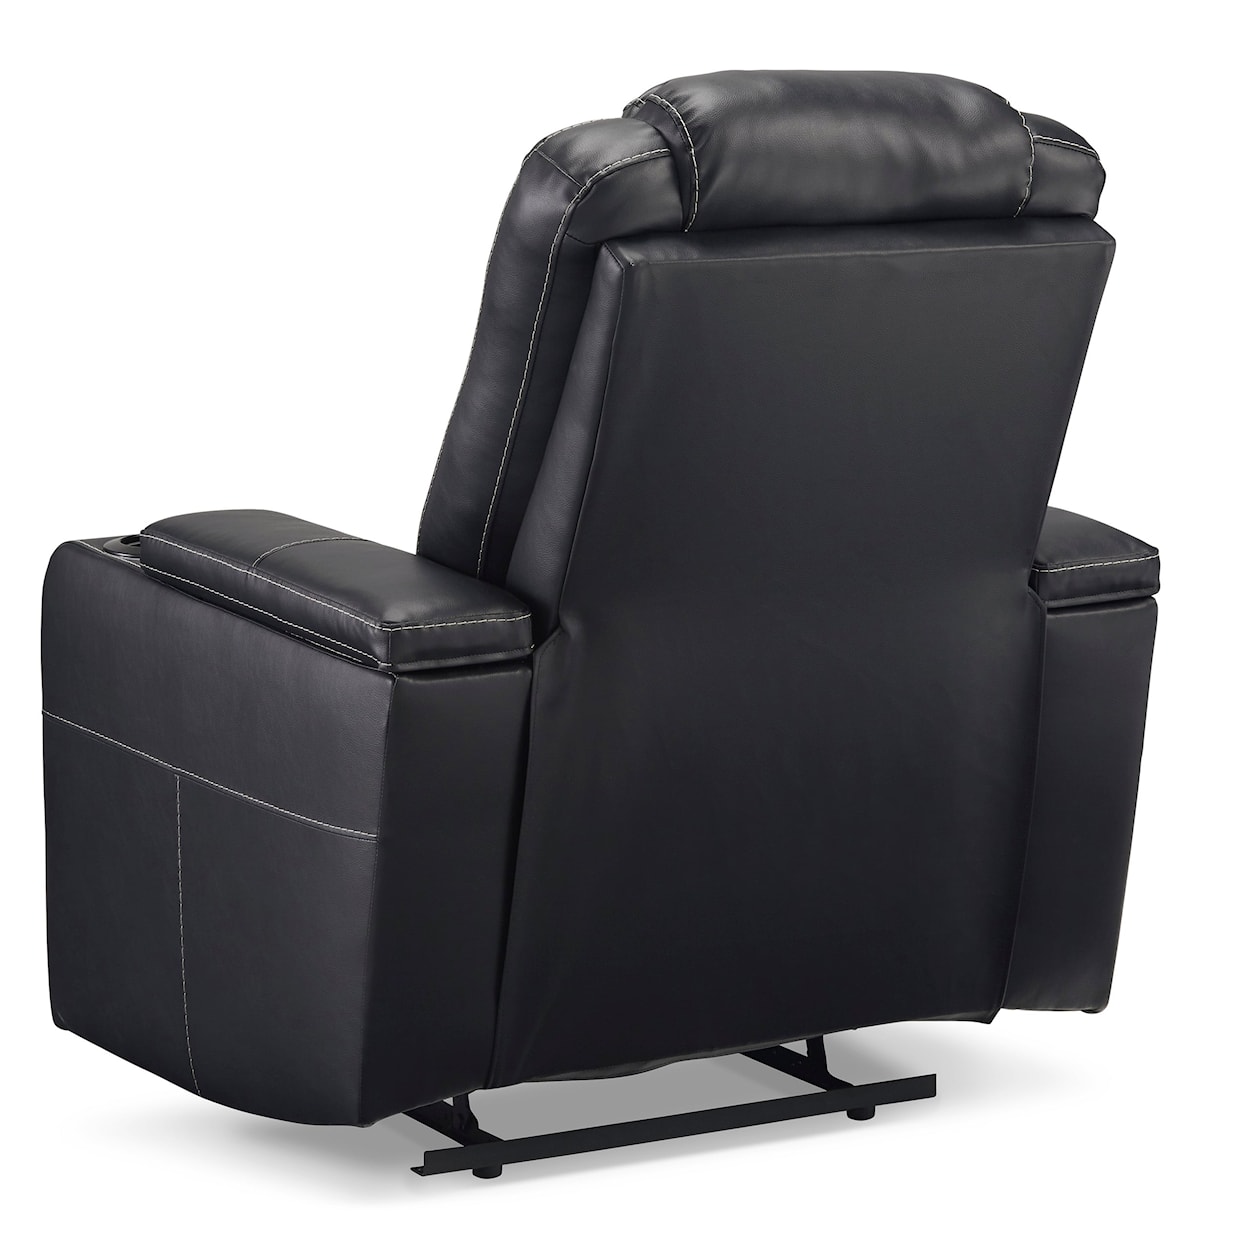 Signature Design by Ashley Furniture Center Point Power Recliner